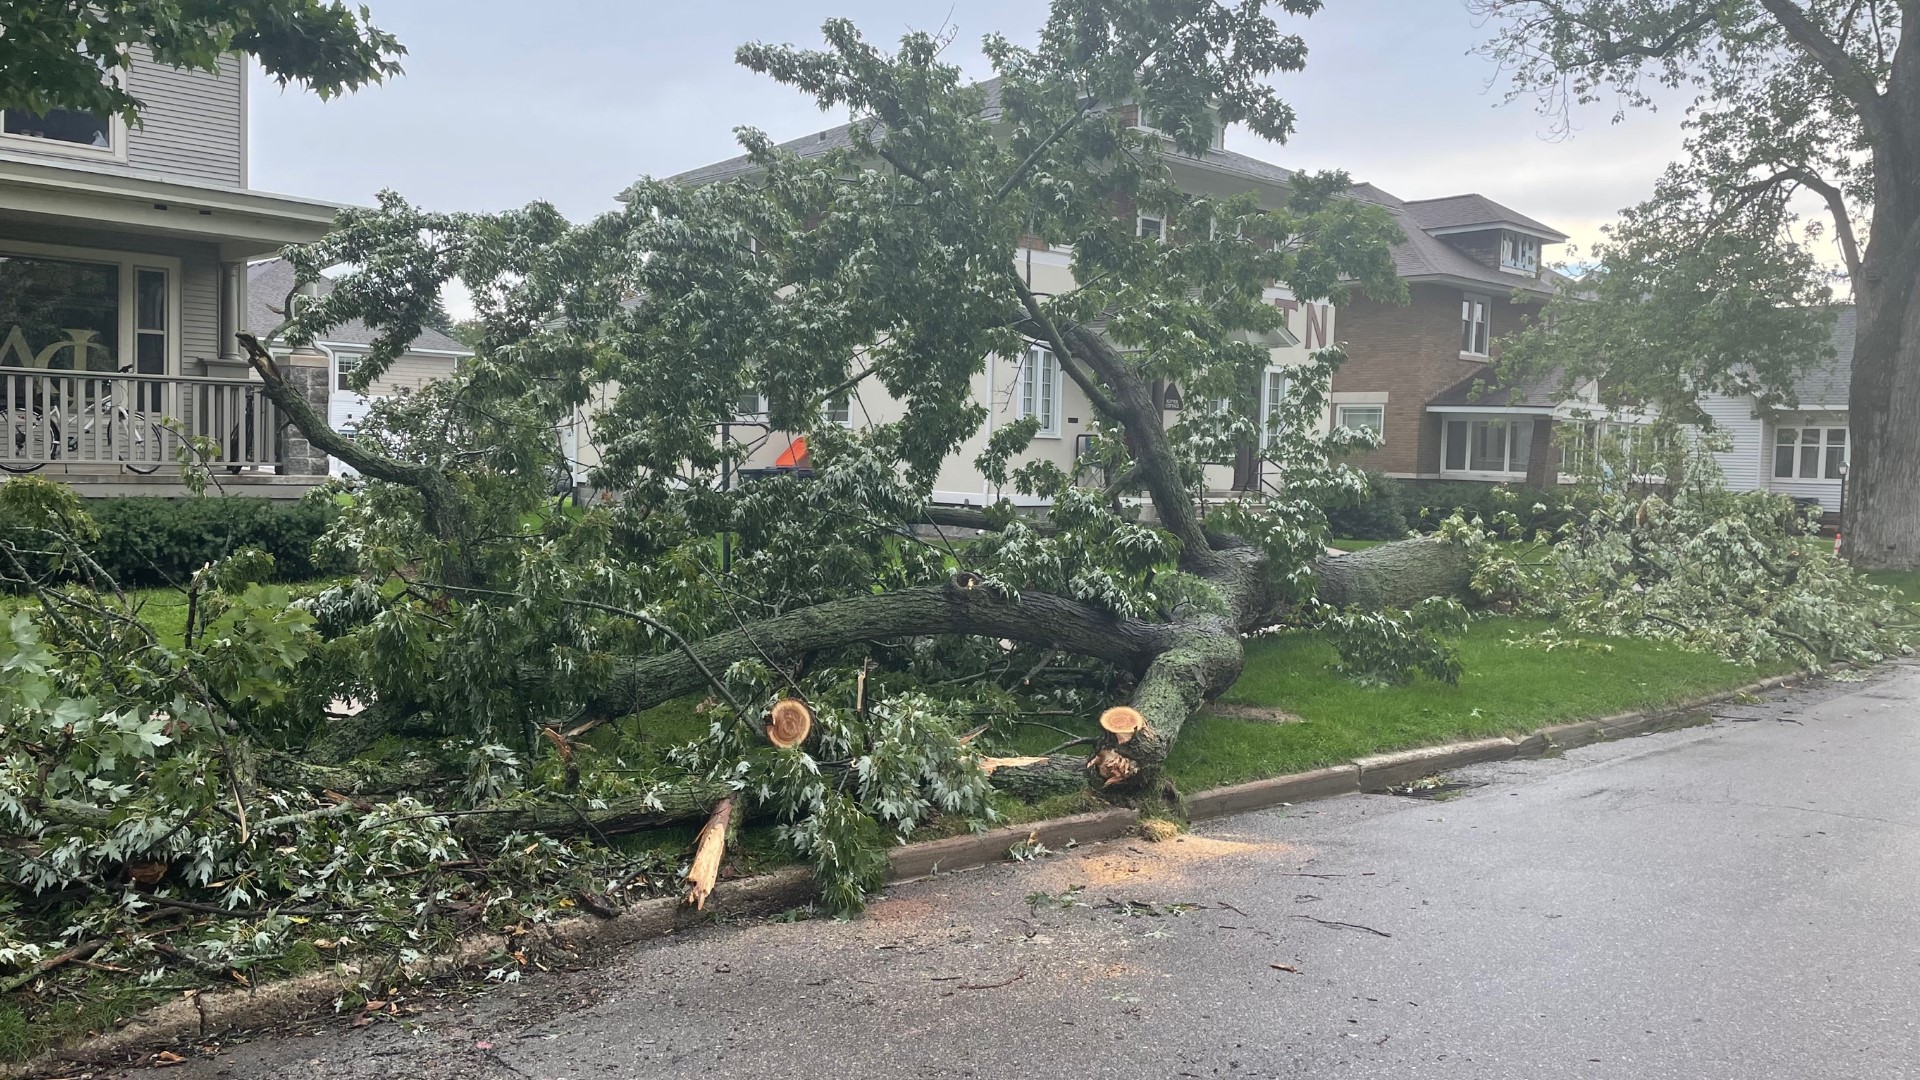 Downed trees and wires caused by the storms have left many Michiganders in the dark on Tuesday.